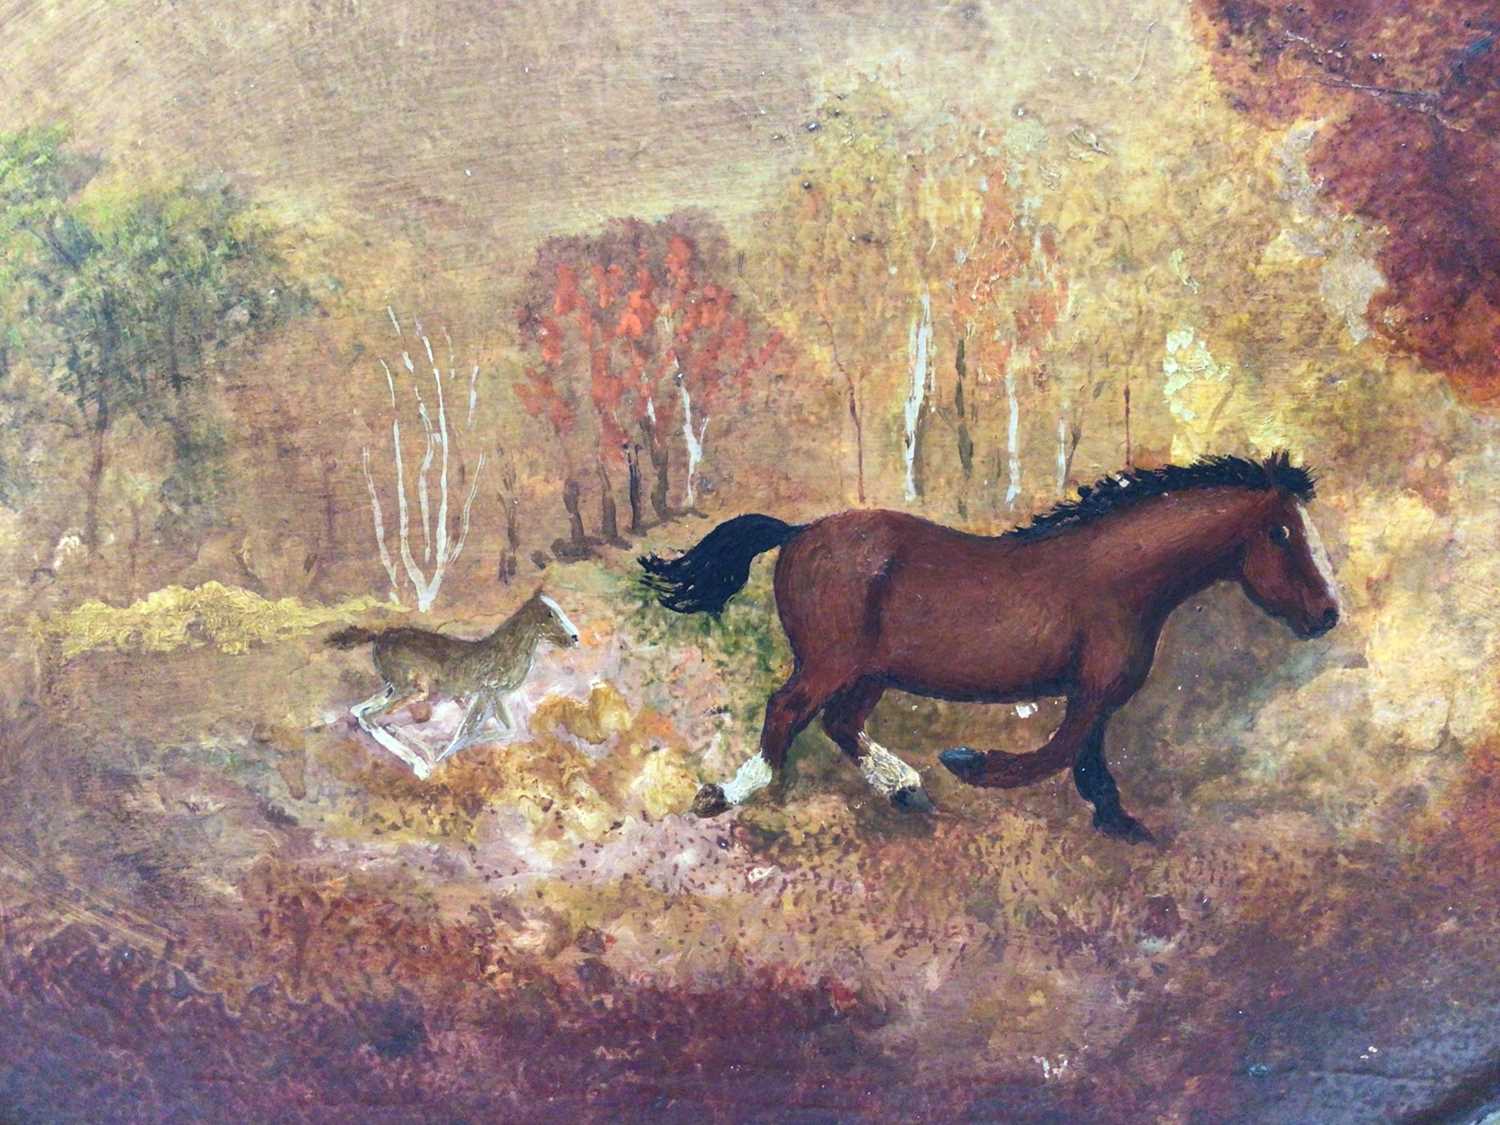 Lot 22 - Early/Mid 20th century Naive oval oil on board - mare and foal in landscape, 28cm x 38cm, framed